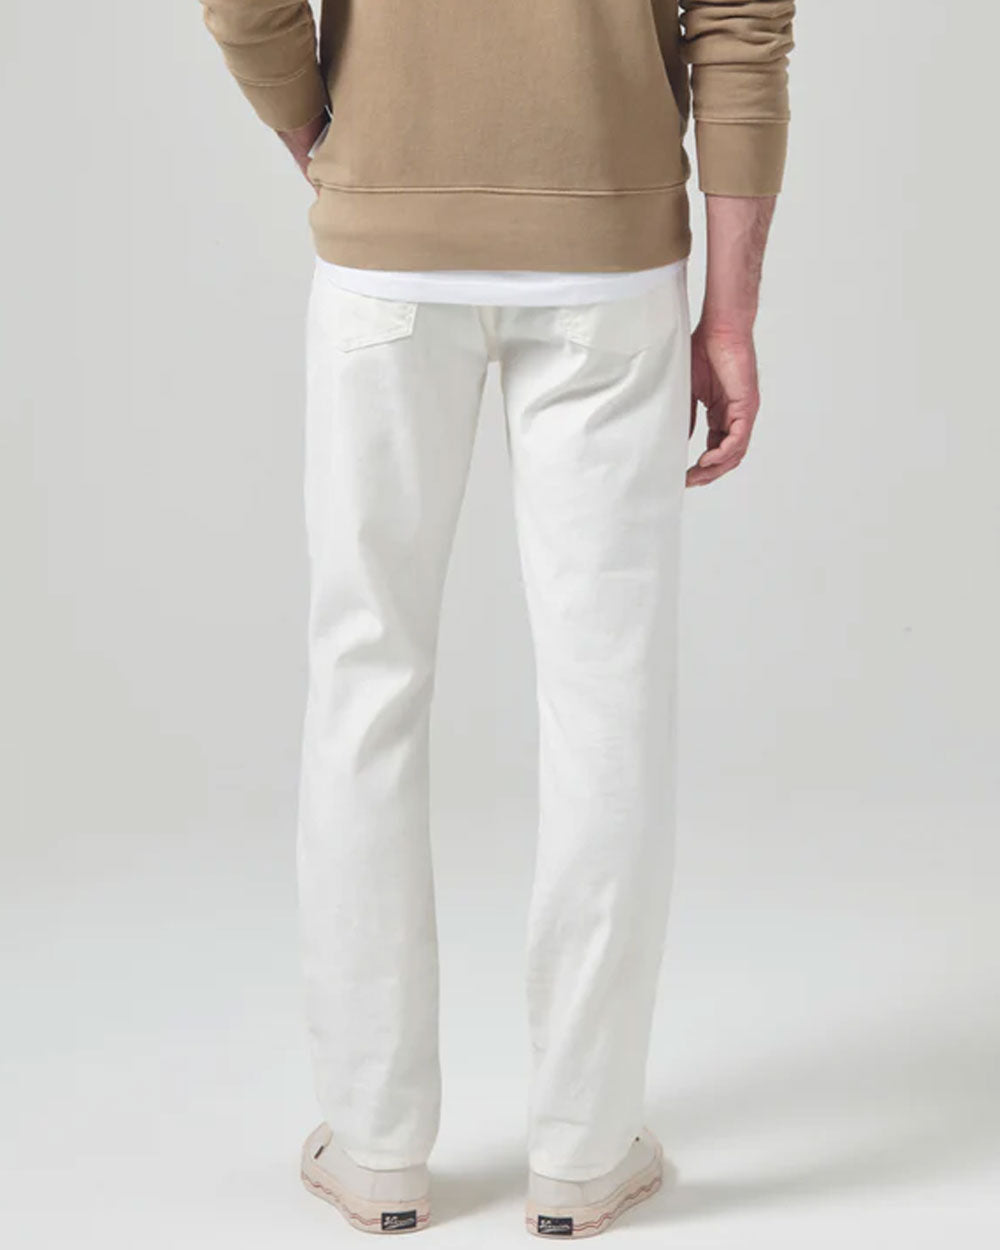 The Gage Stretch Linen Pant in Sierra